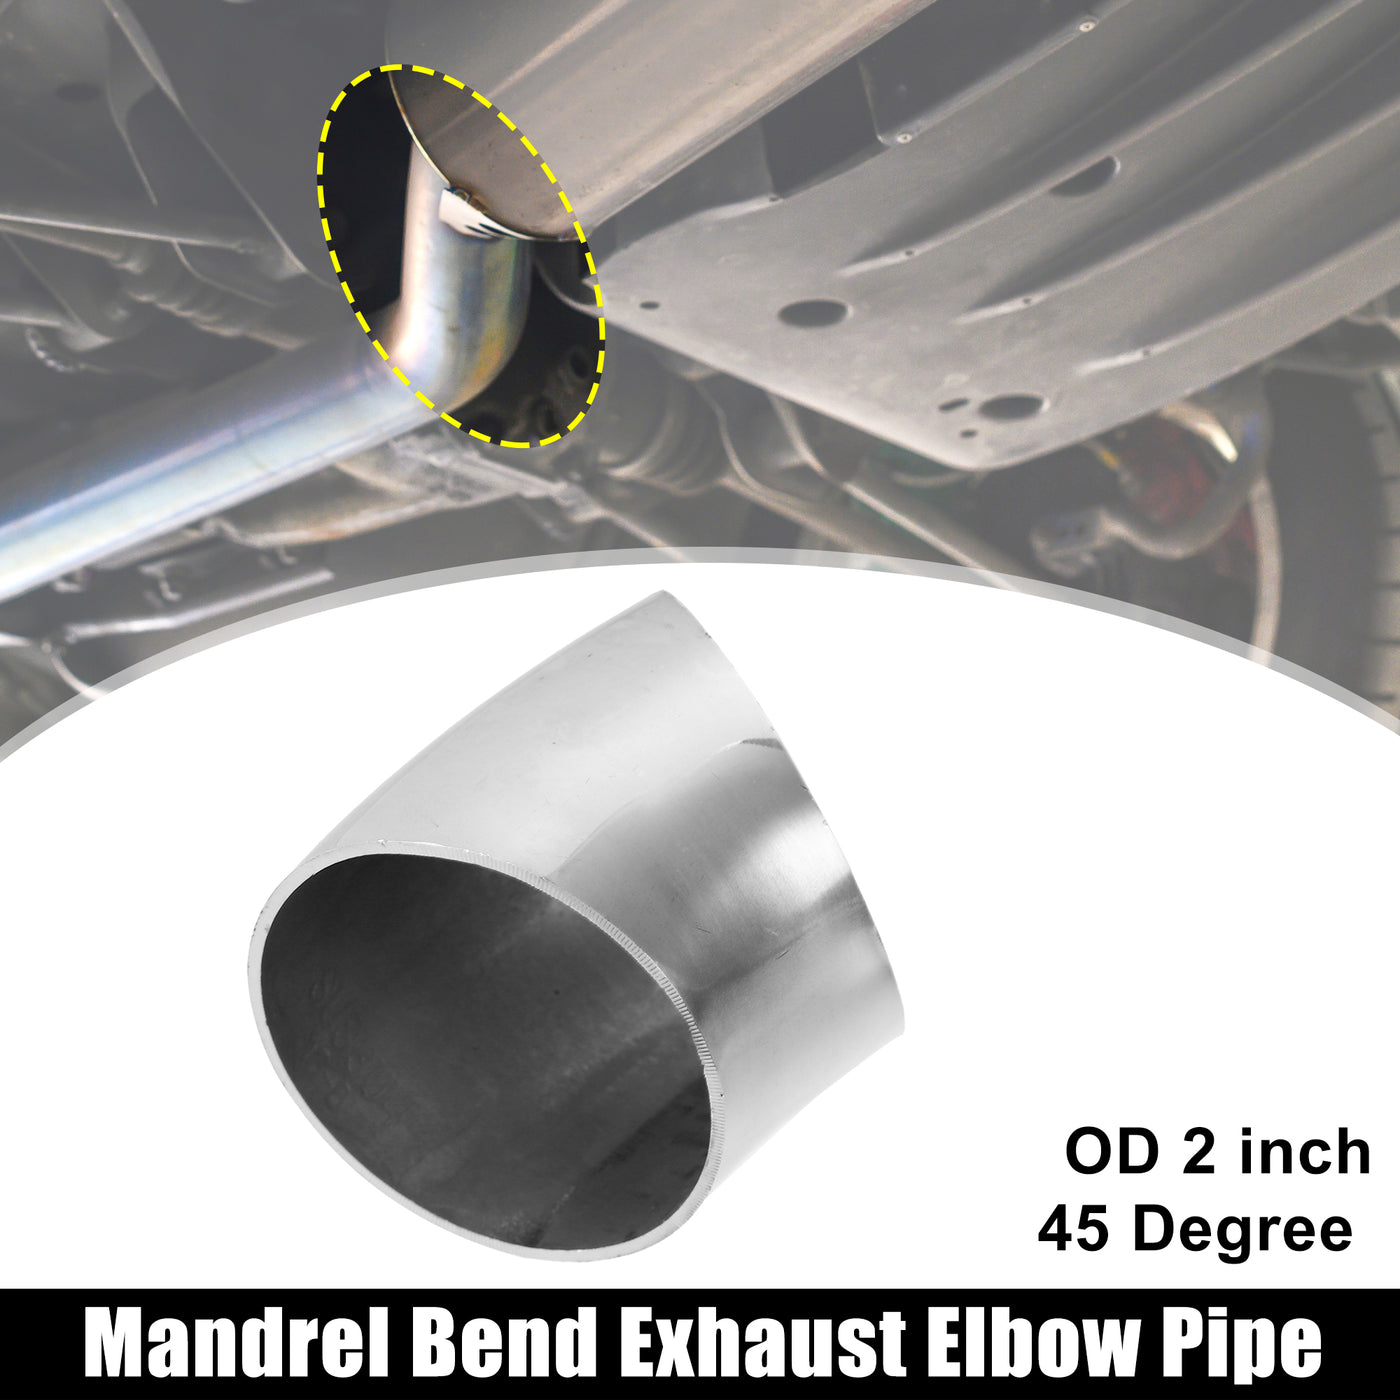 X AUTOHAUX 1 Pcs OD 2 Inch 45 Degree Mandrel Bend Elbow Bend Tube Exhaust Elbow Pipe for Car Modified Exhaust System 2" Piping Silver Tone